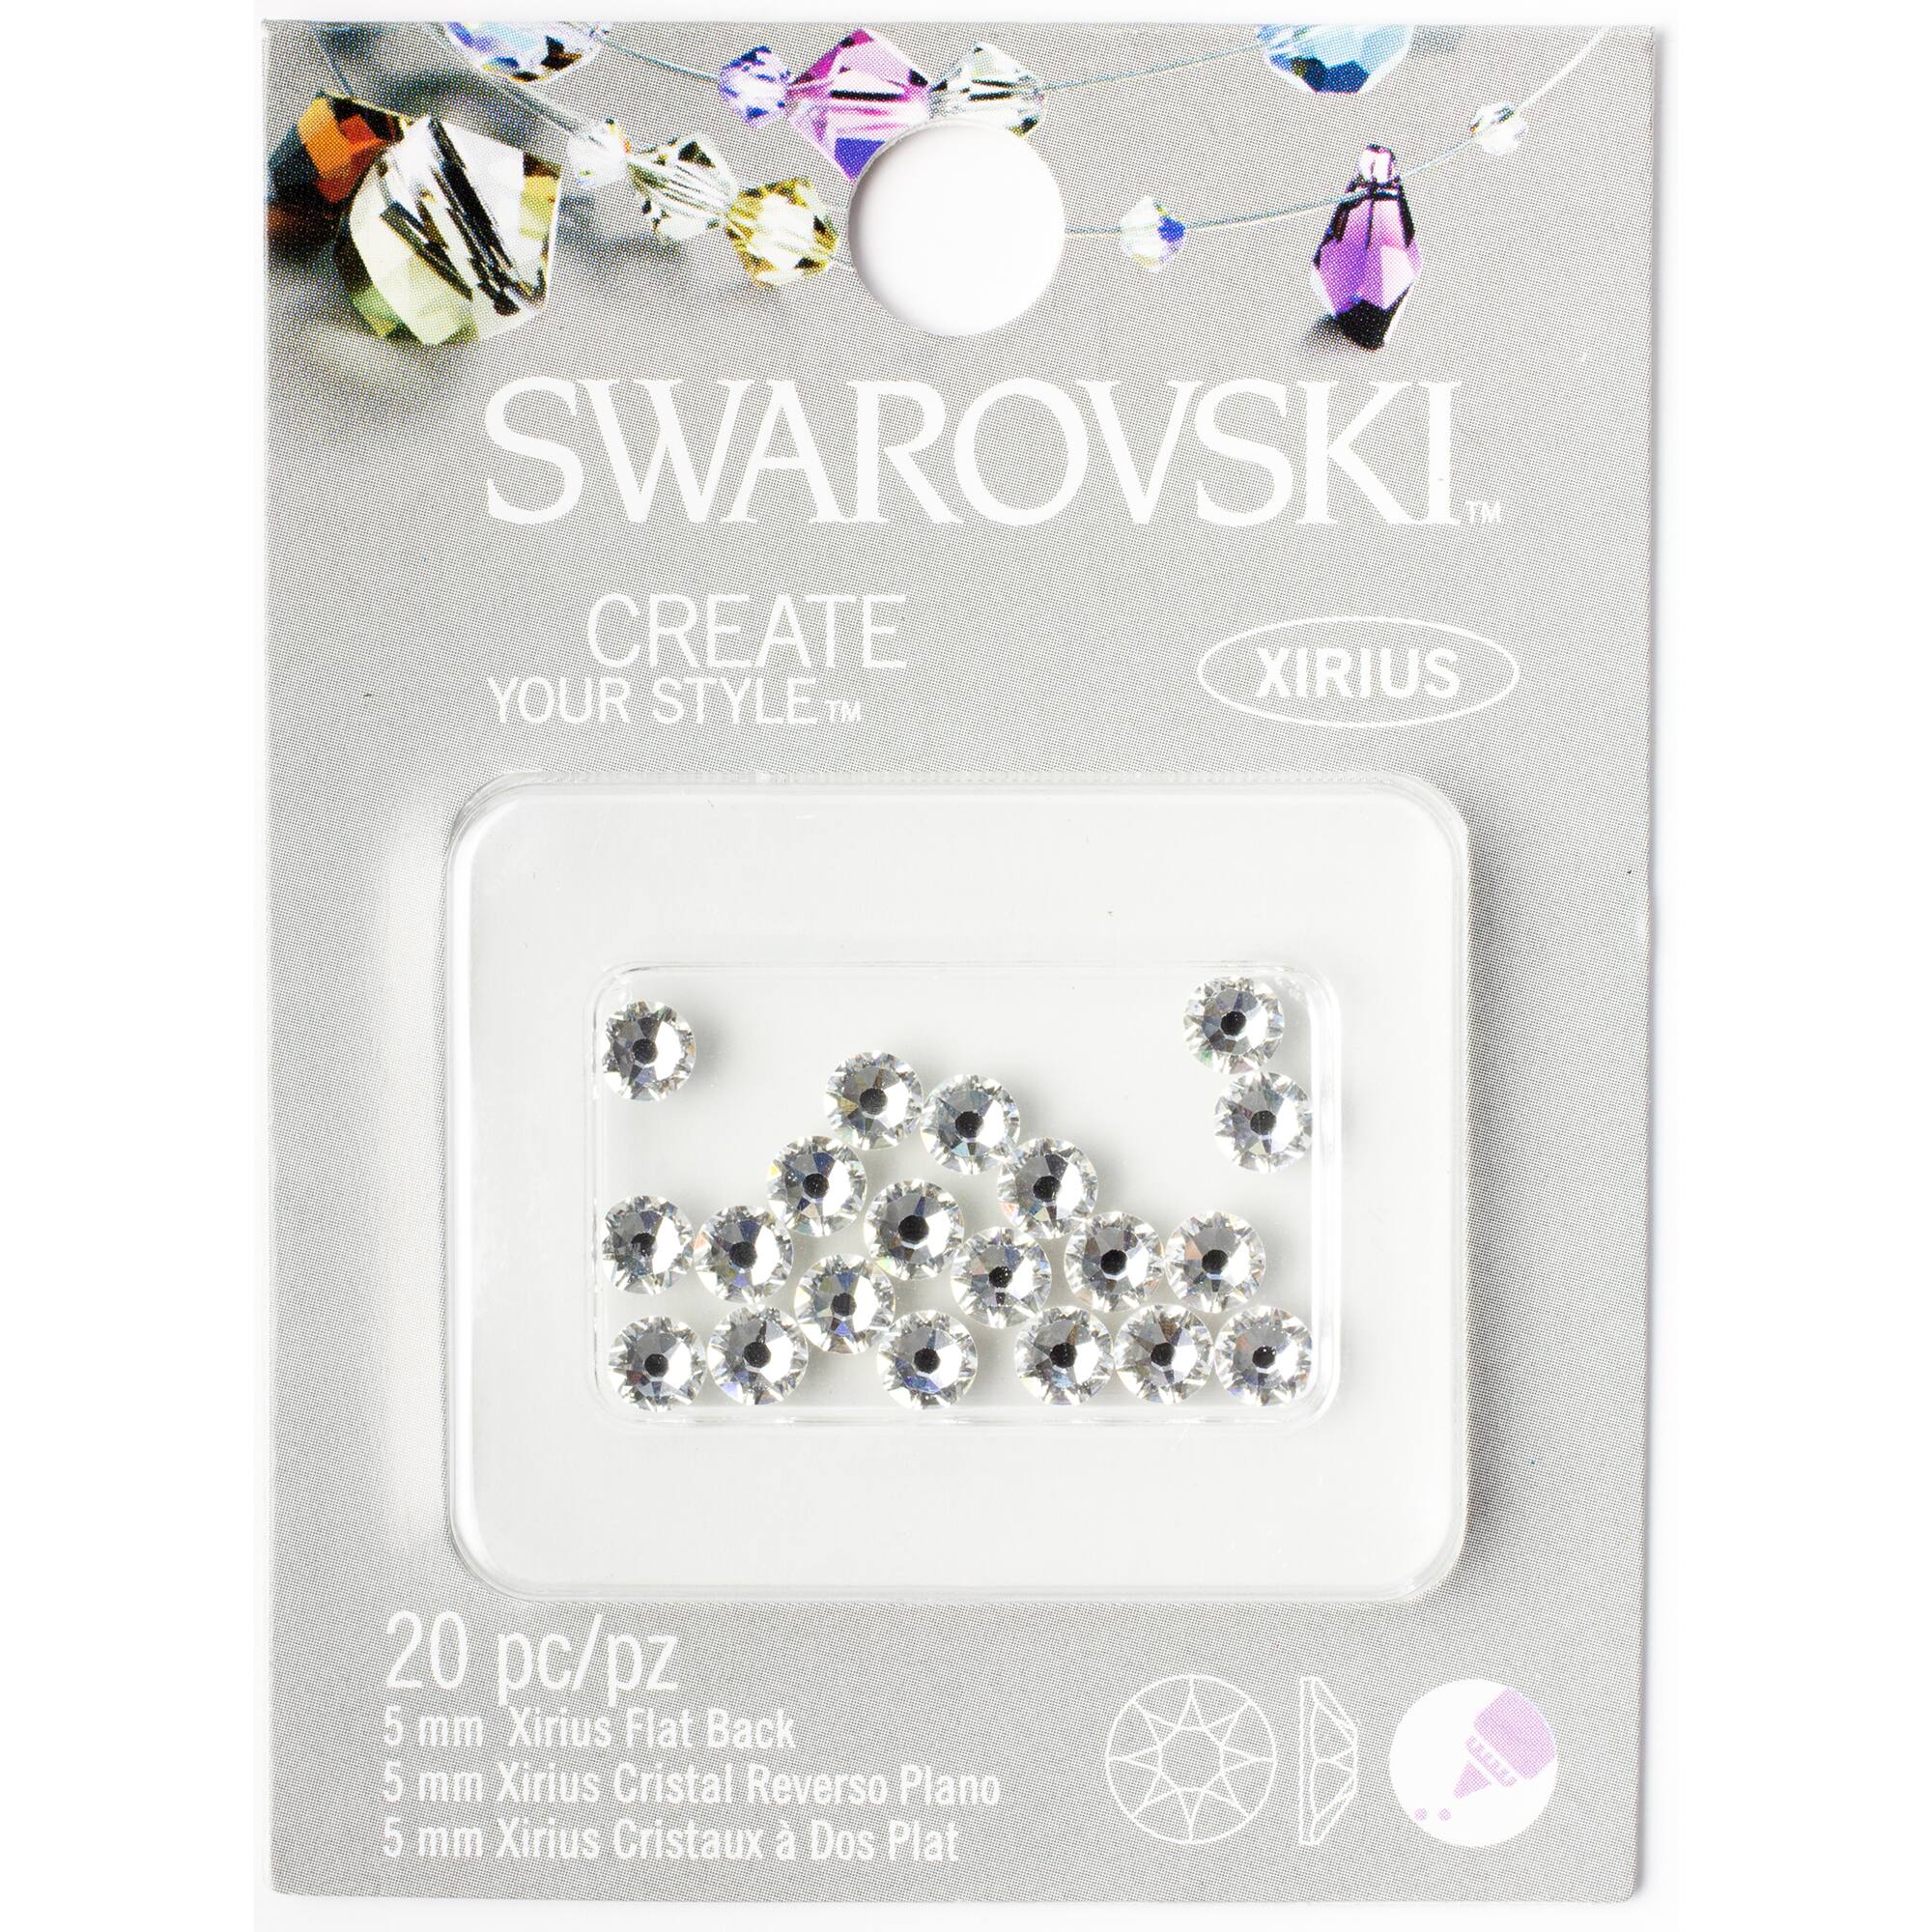 Find the Swarovski™ Create Your Style™ Flat Back Crystals, 5mm at Michaels